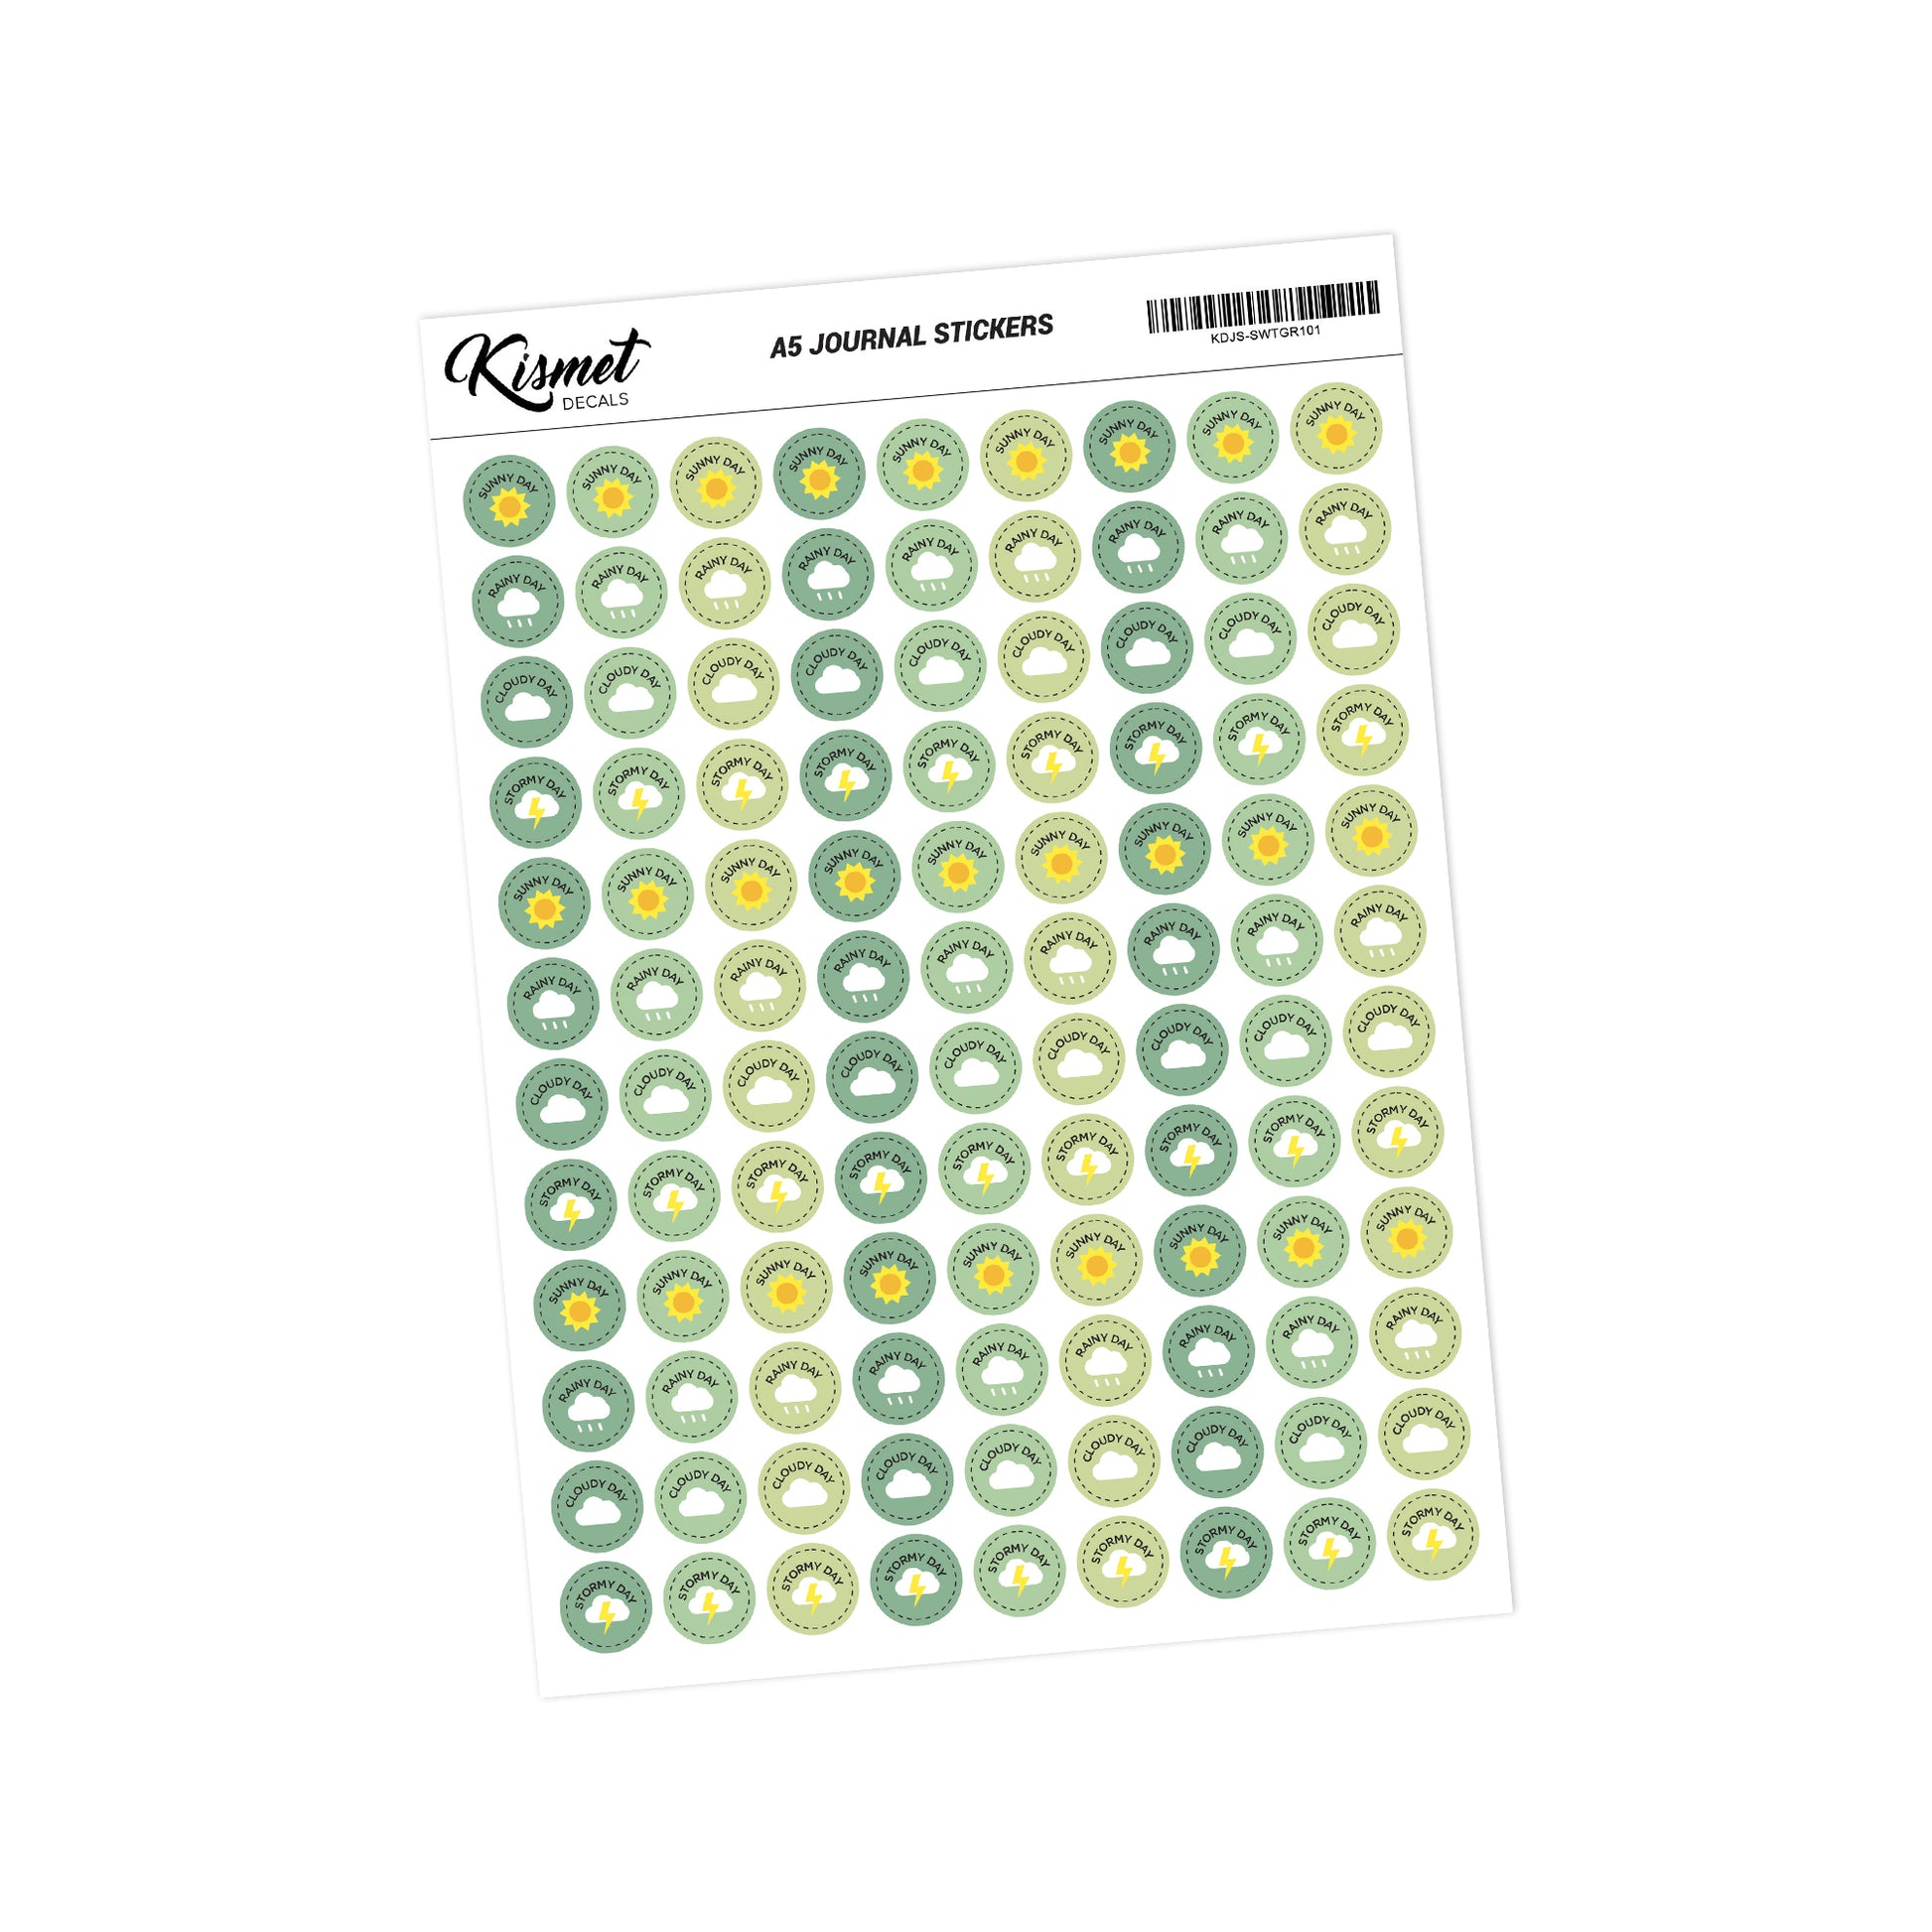 SUNNYHILL Sticker Collecting A5 Reusable Paper 100 Sheets 8.2 x 5.9  6-Hole (100 Sheets of Sticky Pages)